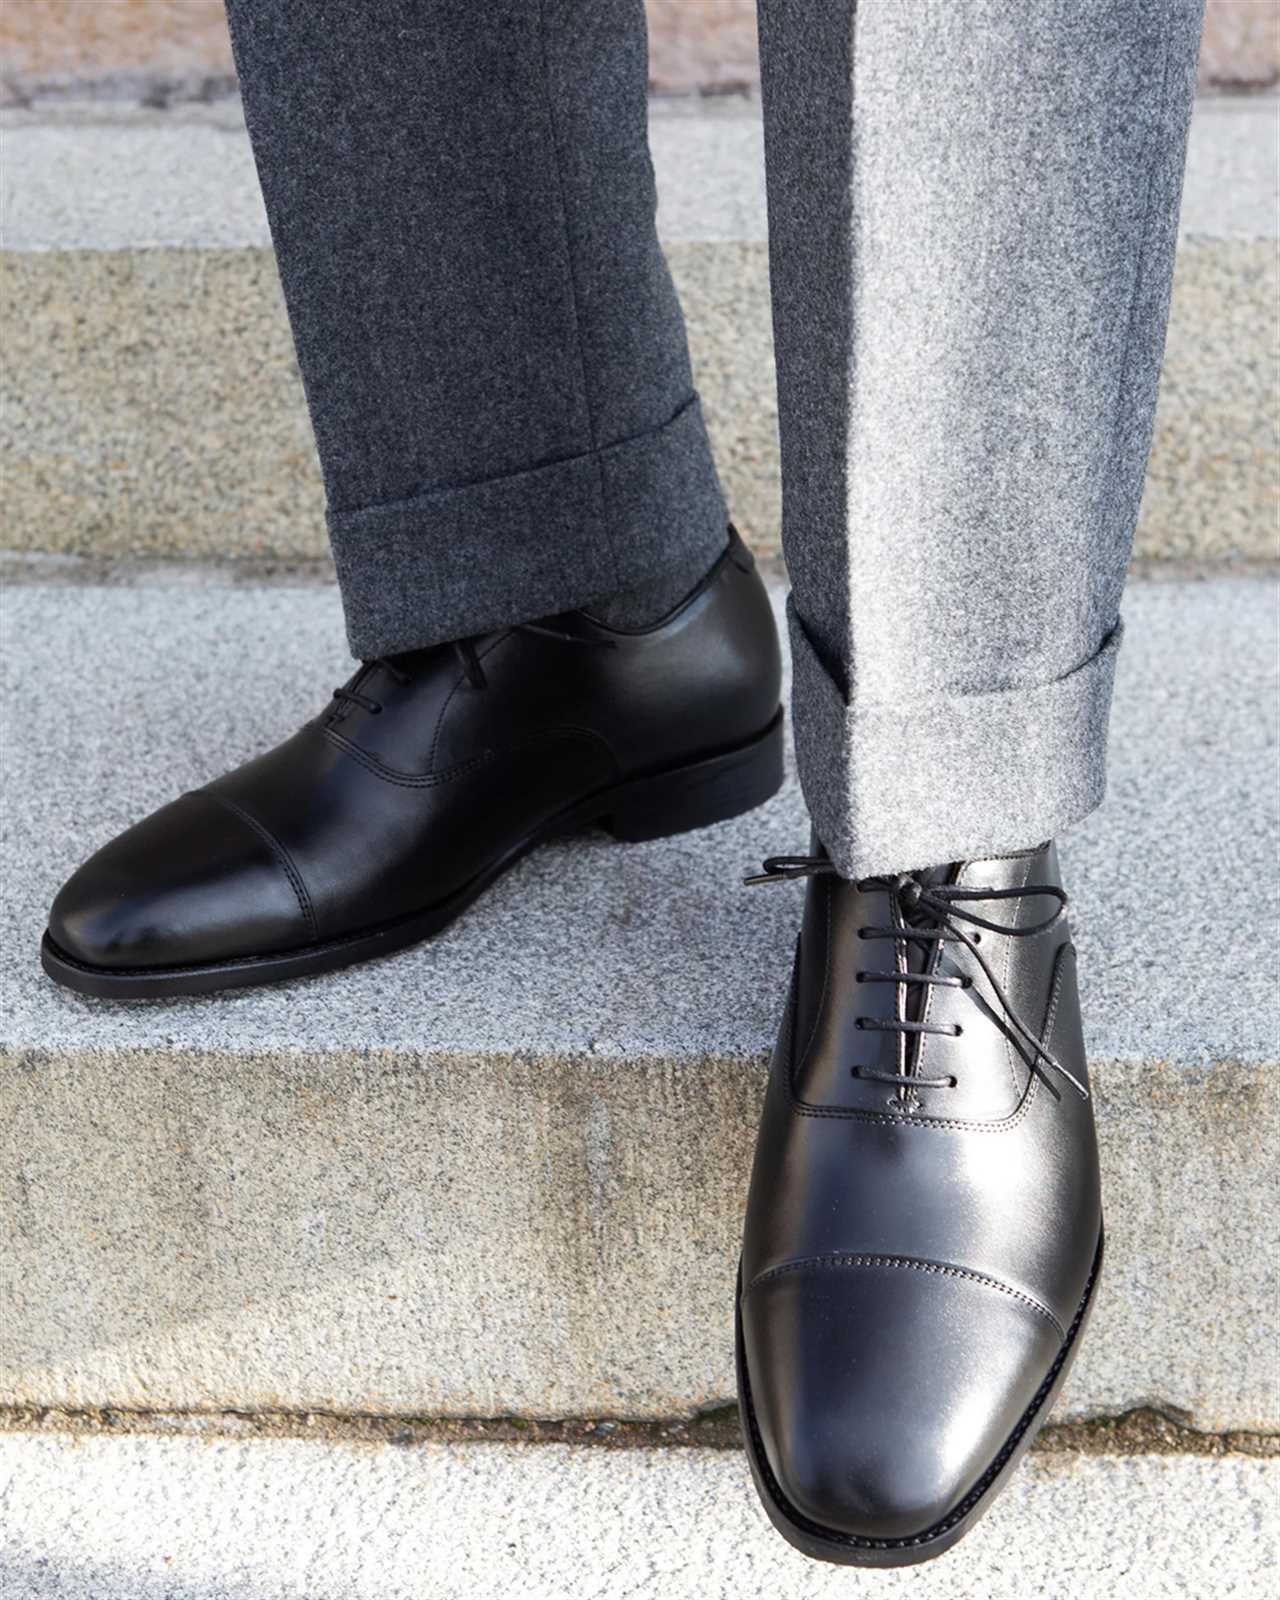 Formal Footwear Favourites: 5 Smart Shoes Every Man Needs